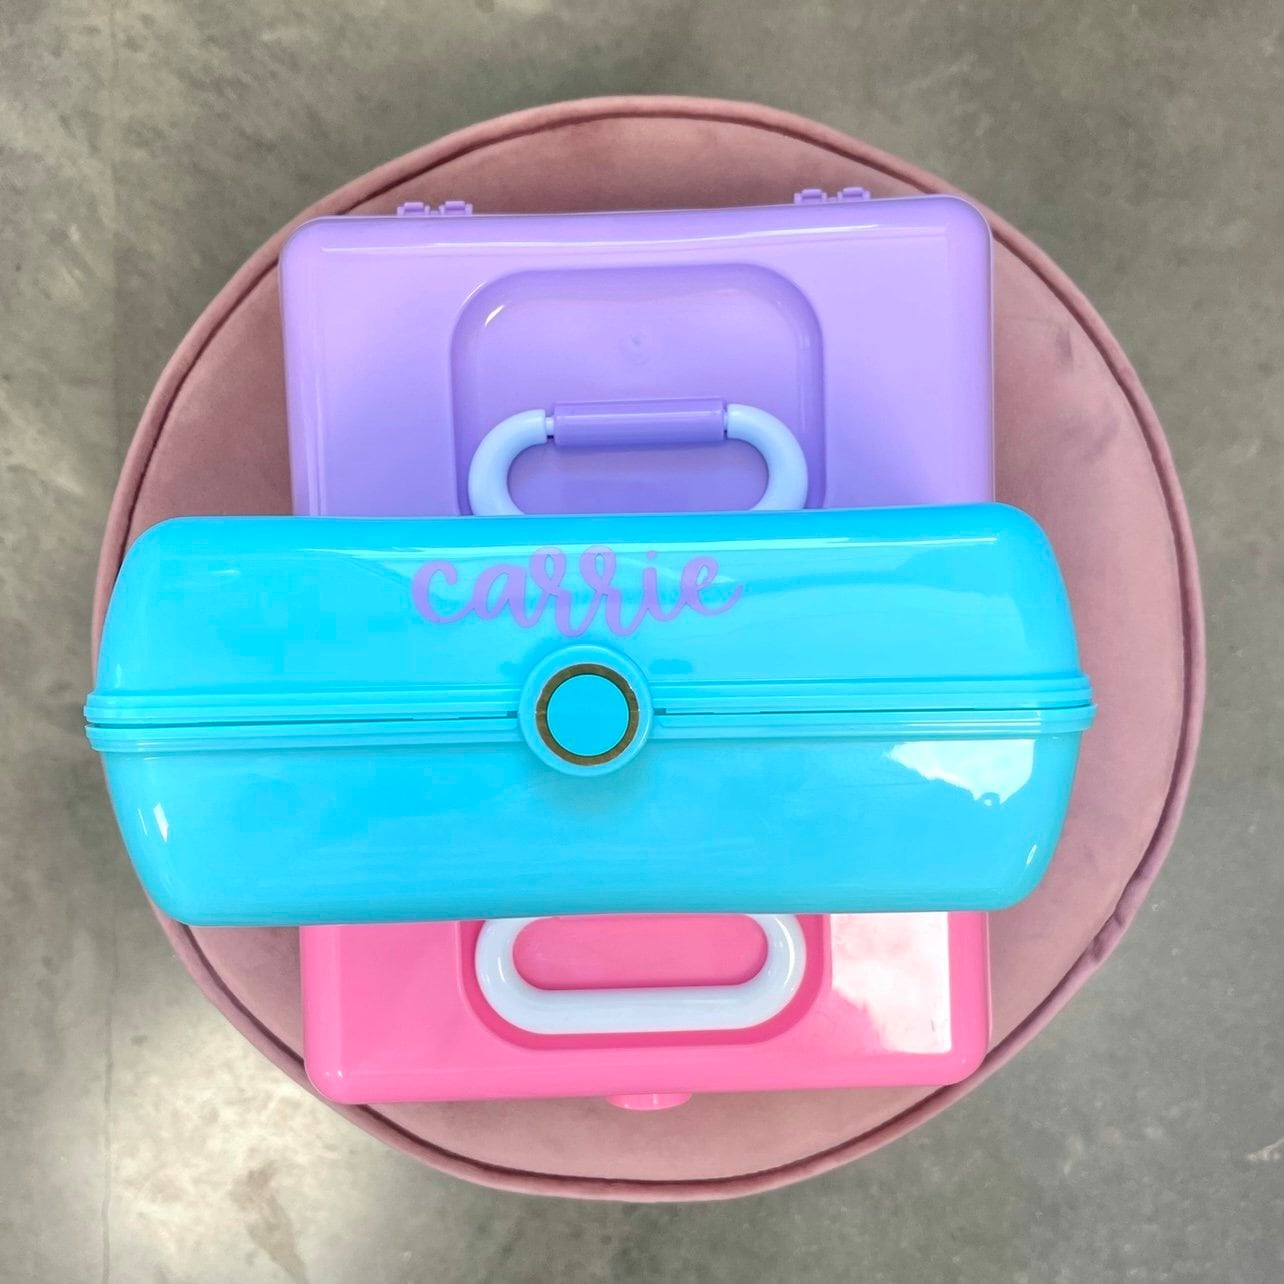 Caboodle Petite Carrying Case with Mirror - Blue & Purple